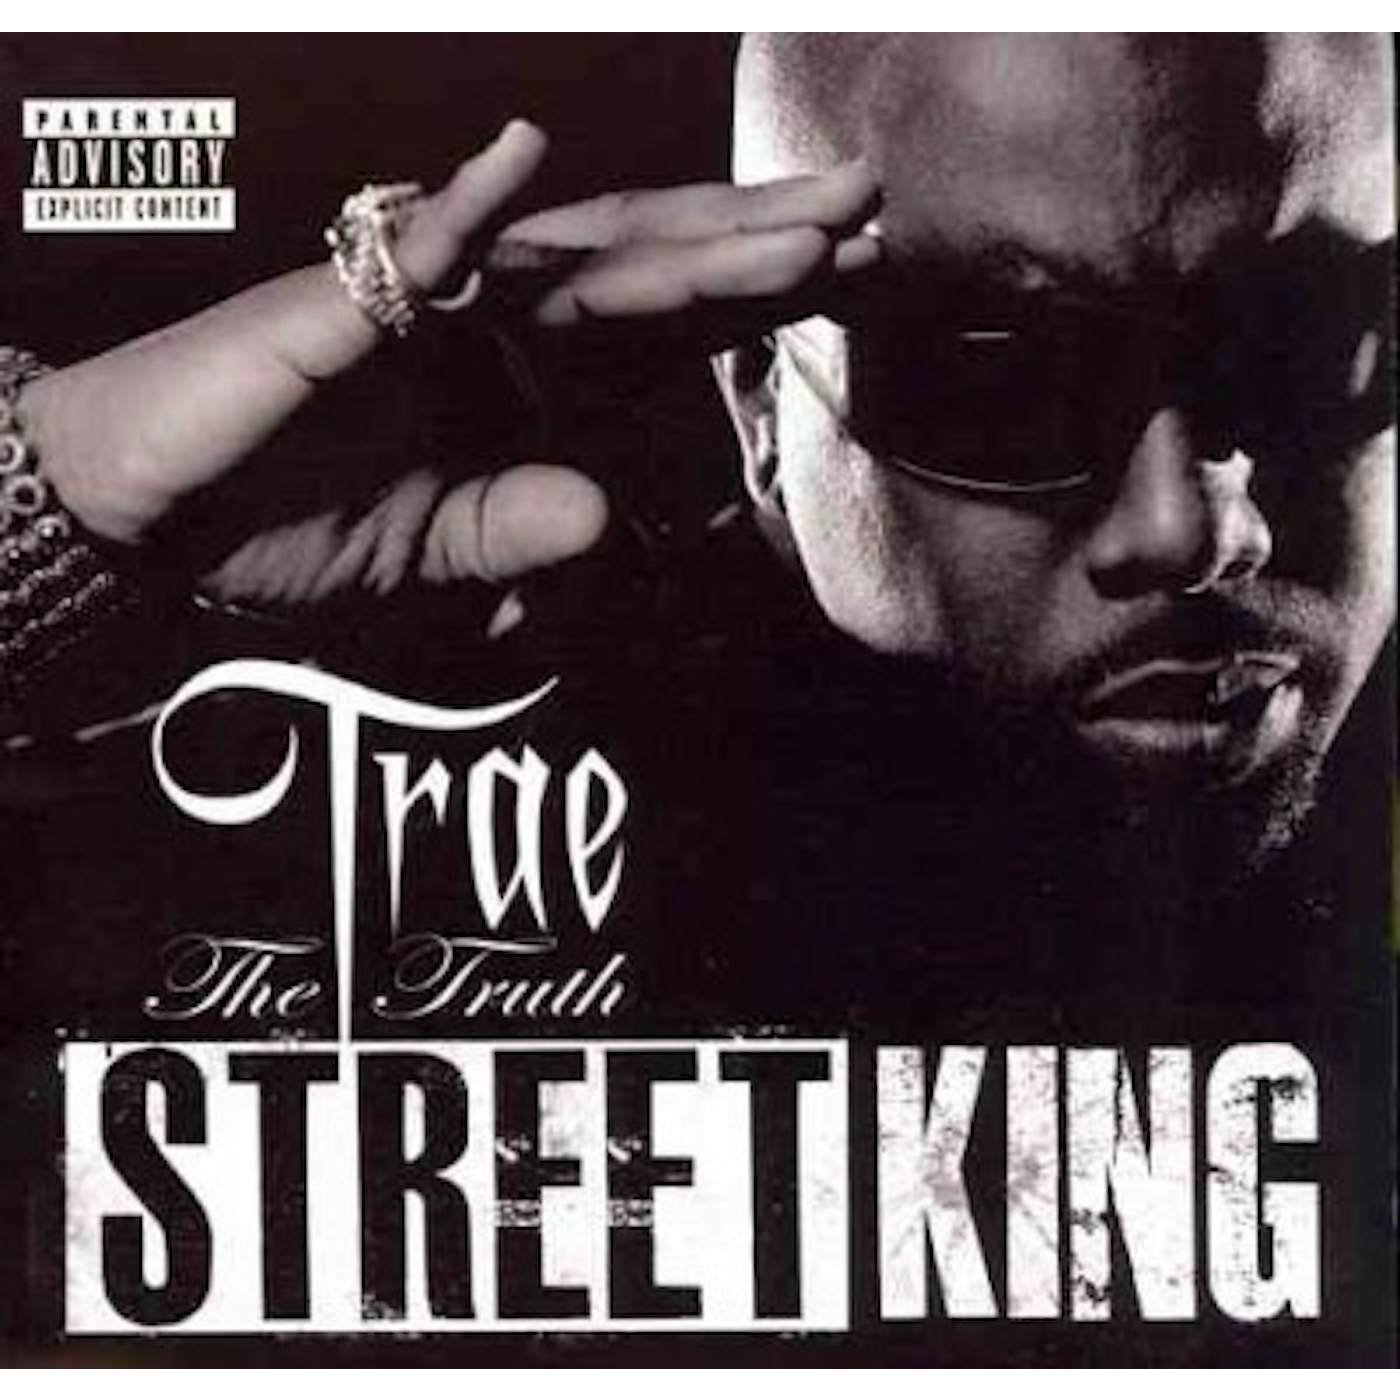 Trae tha Truth & The Worlds Freshest Street King (Explicit) CD